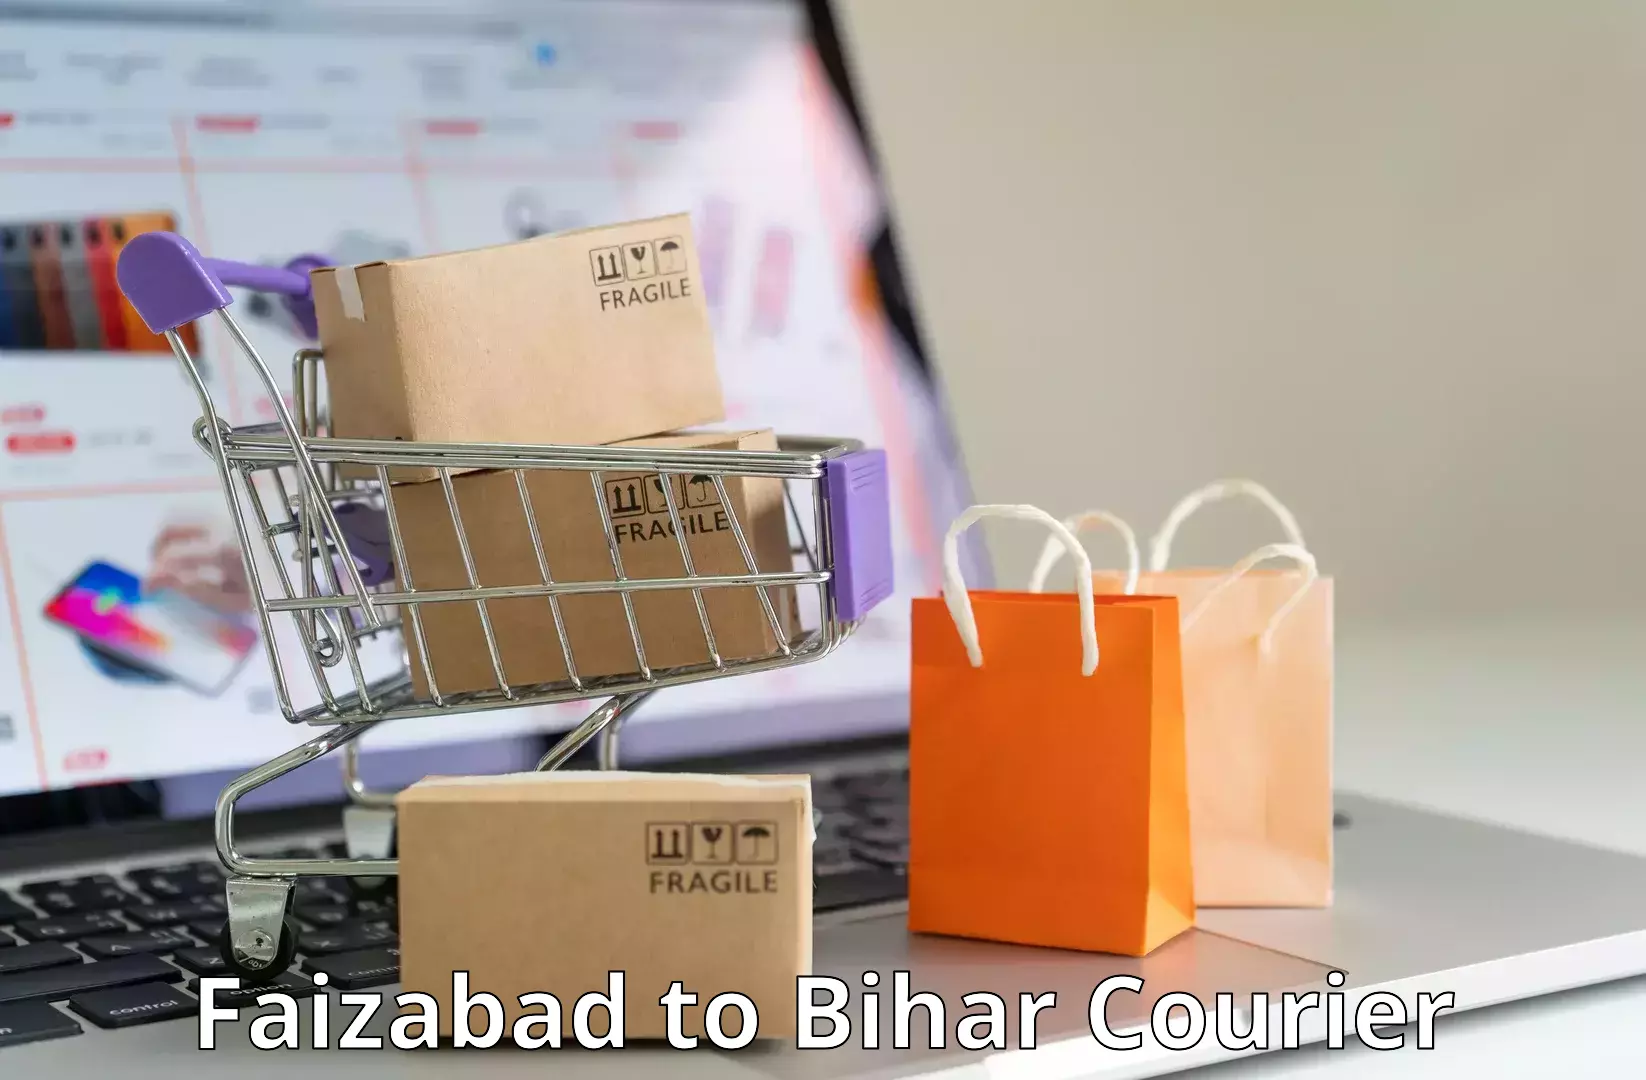 Cash on delivery service Faizabad to Bihar